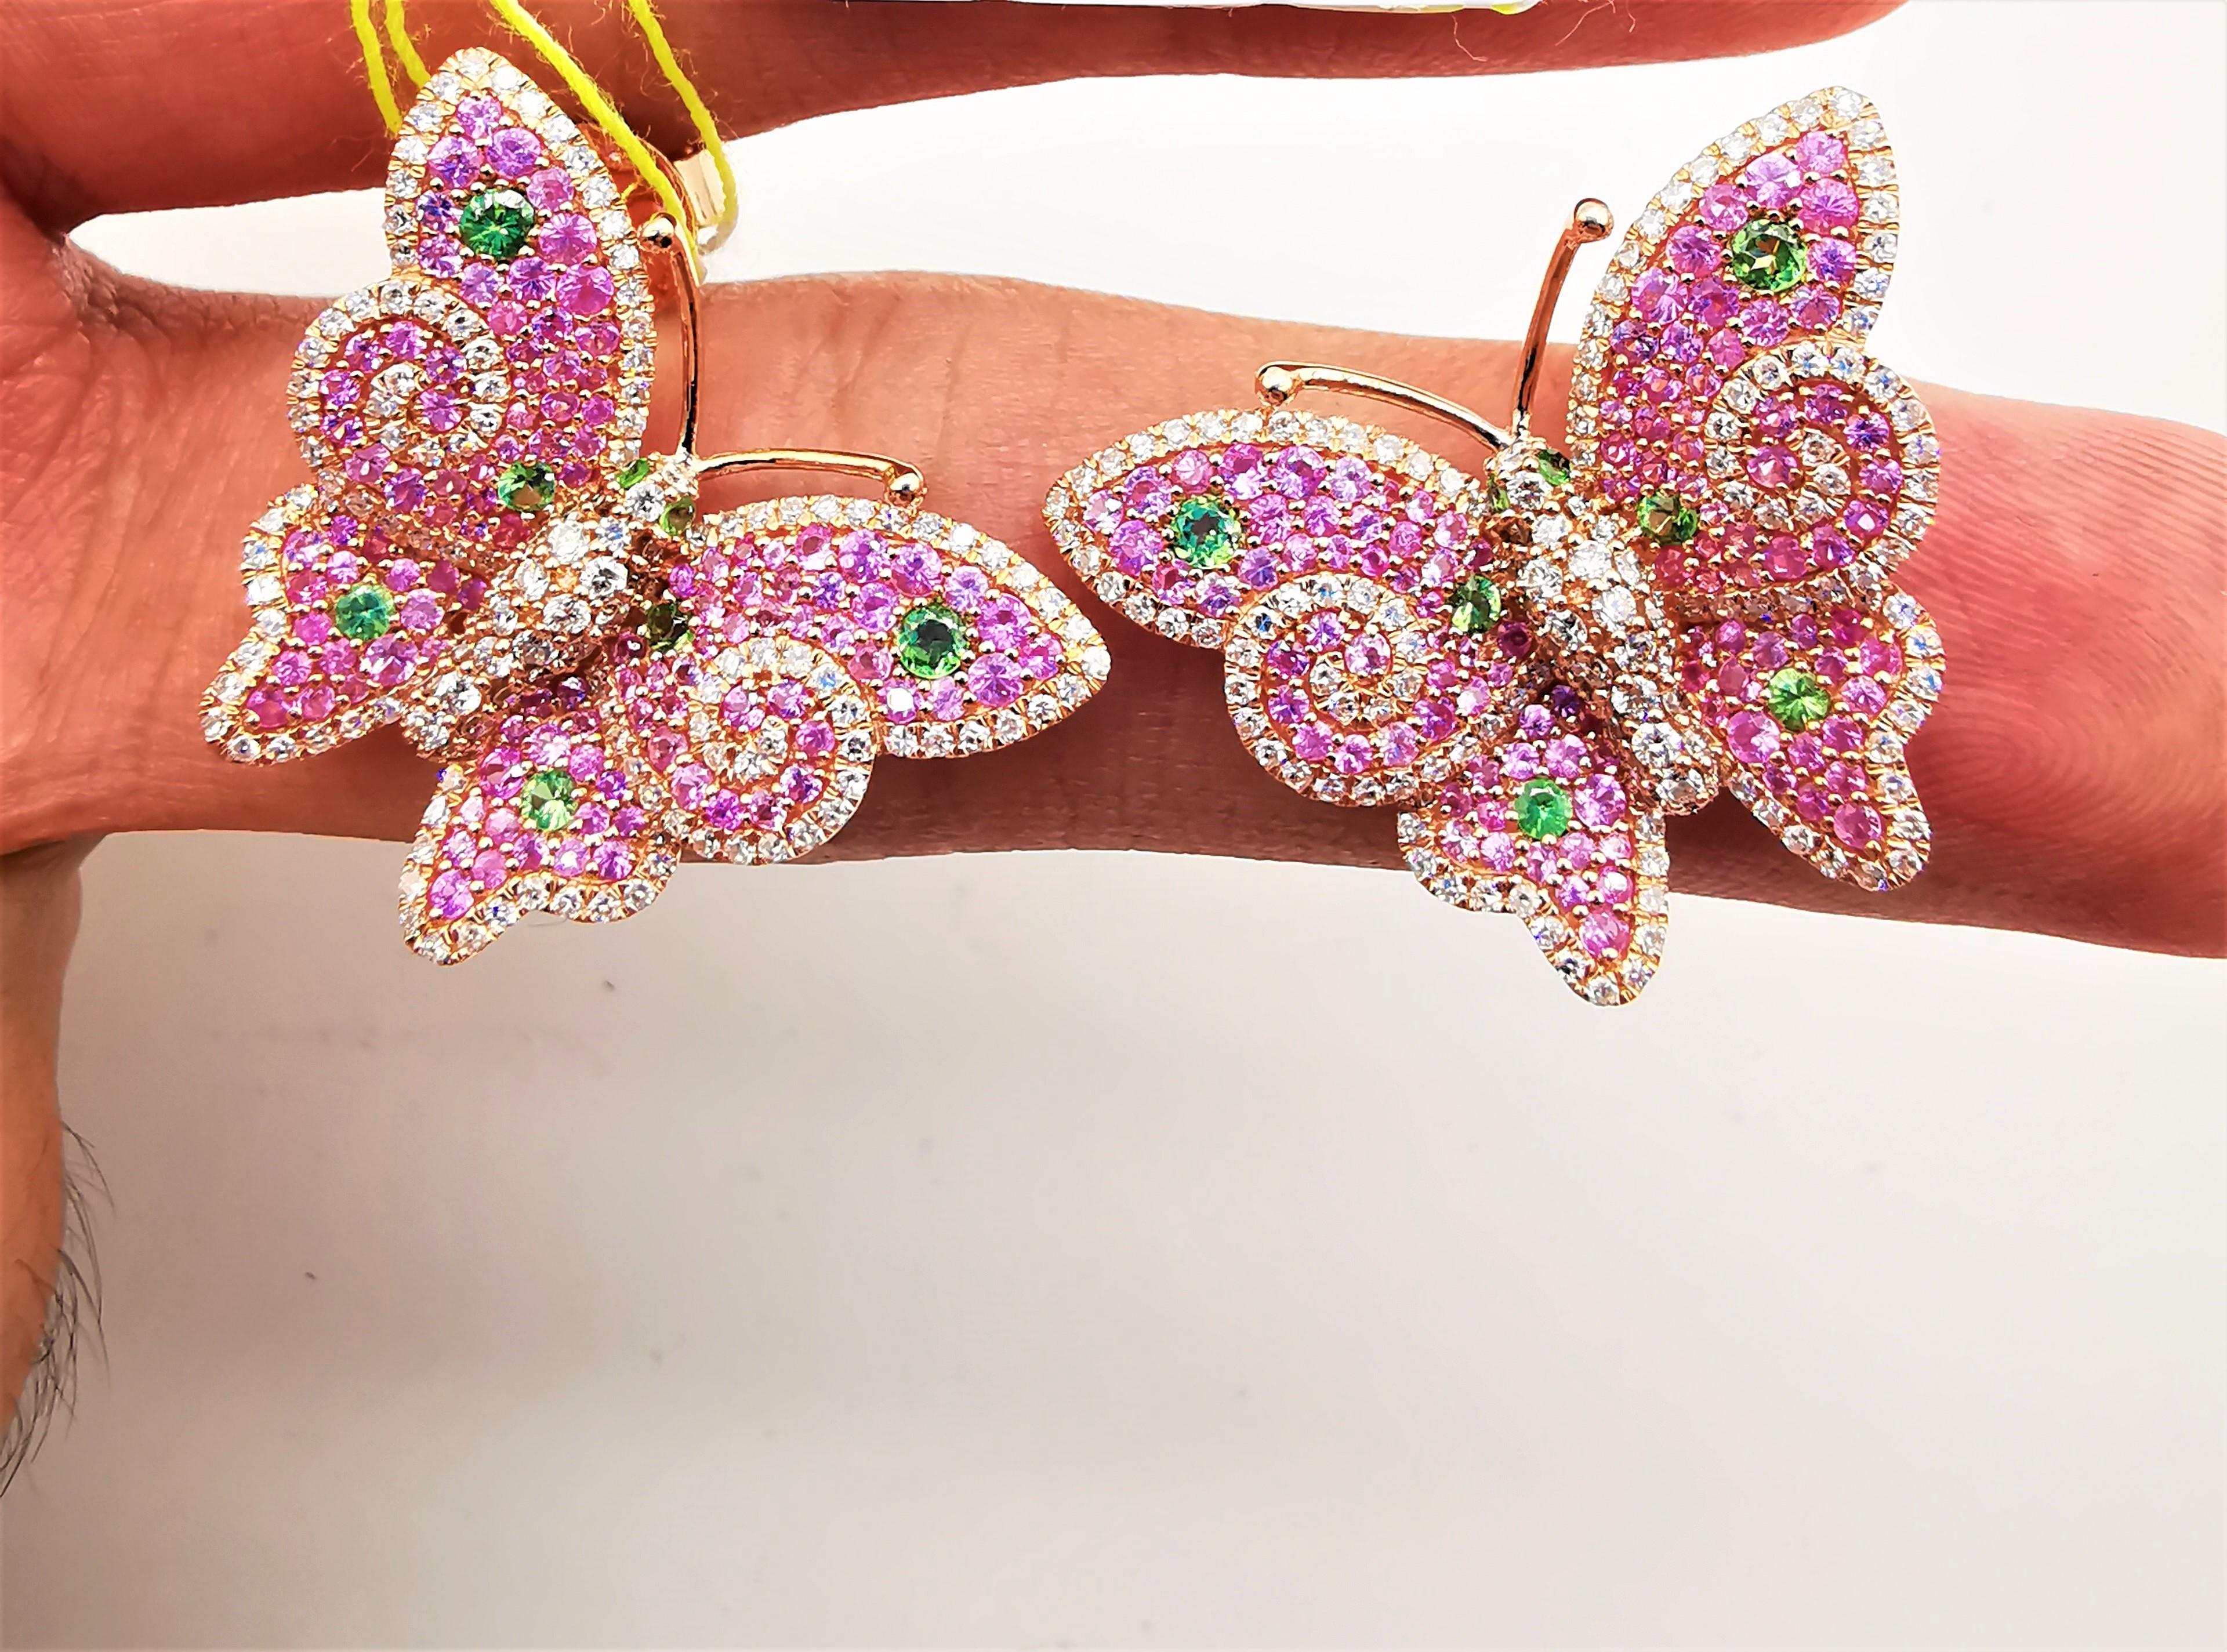 
The Following Items we are offering is a Rare Important Radiant 18KT Yellow Gold and 18KT Gold Gorgeous Glittering Pink Sapphire and Tsavorite Butterfly Diamond Earrings. Earrings  Feature Gorgeous Colorful Pink Sapphires adorned Spectacular